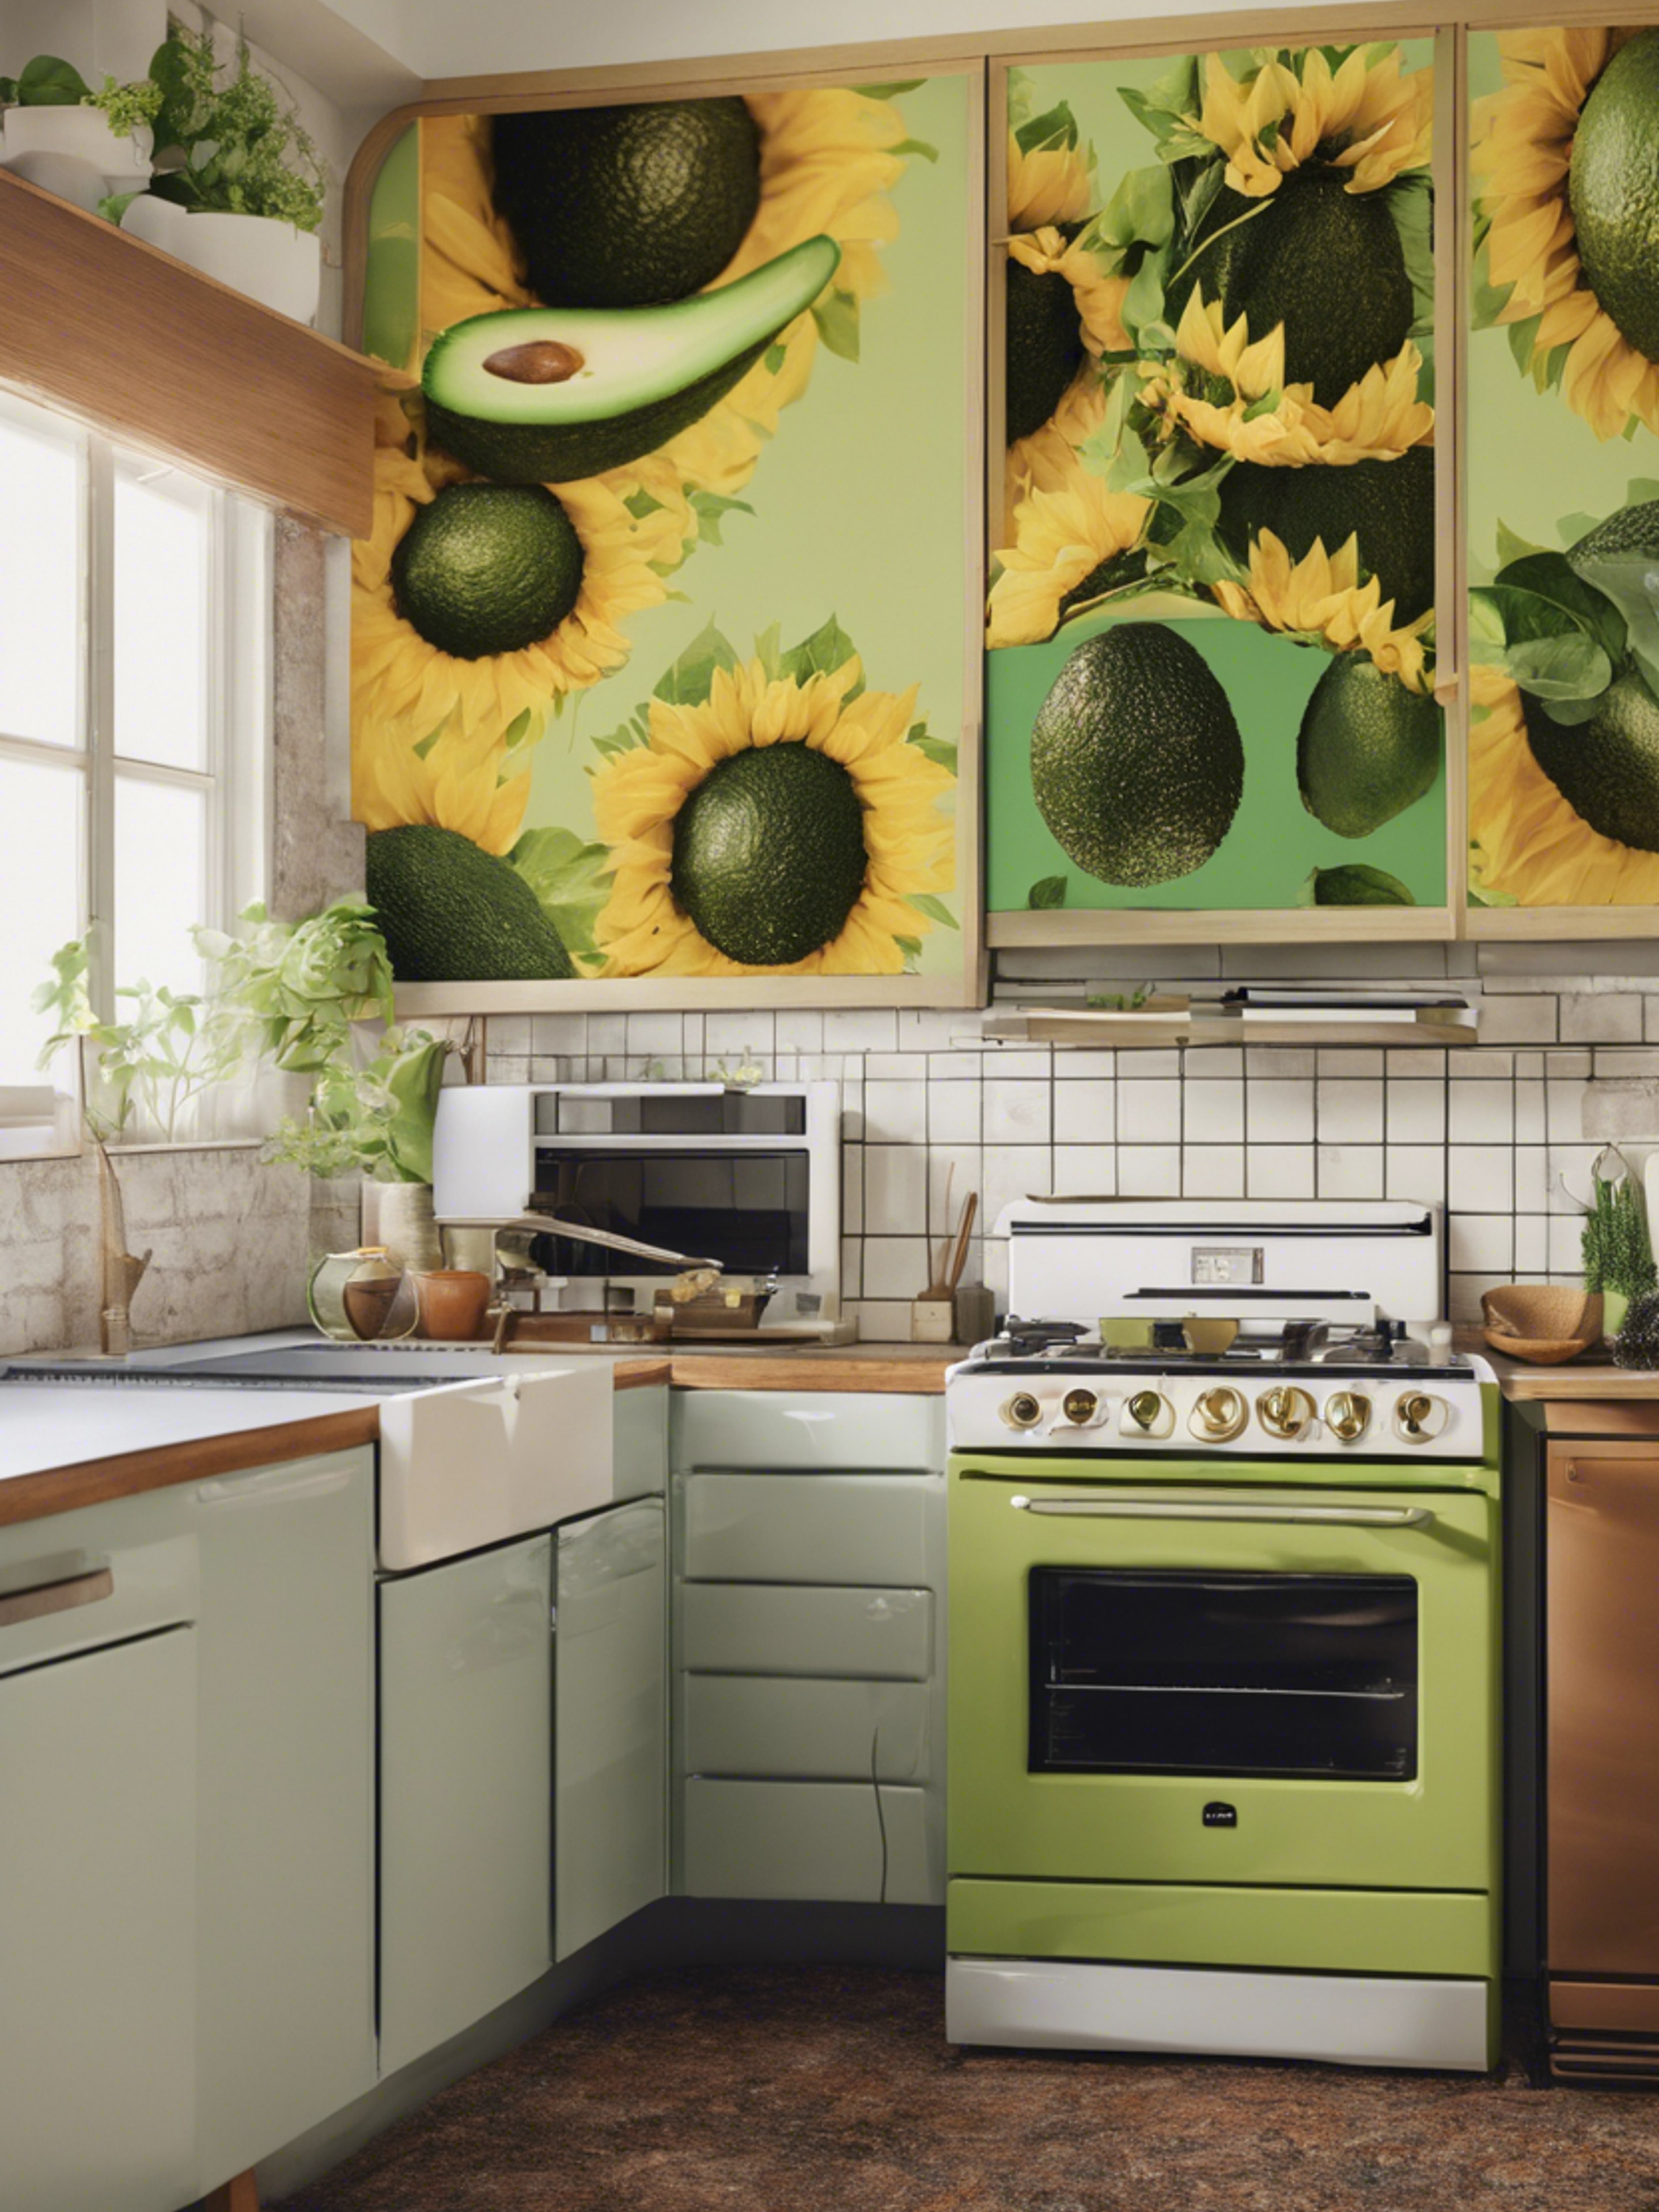 A 70s kitchen with avocado green appliances and oversized sunflower prints Tapet[58674ee3cd464da7b0a1]